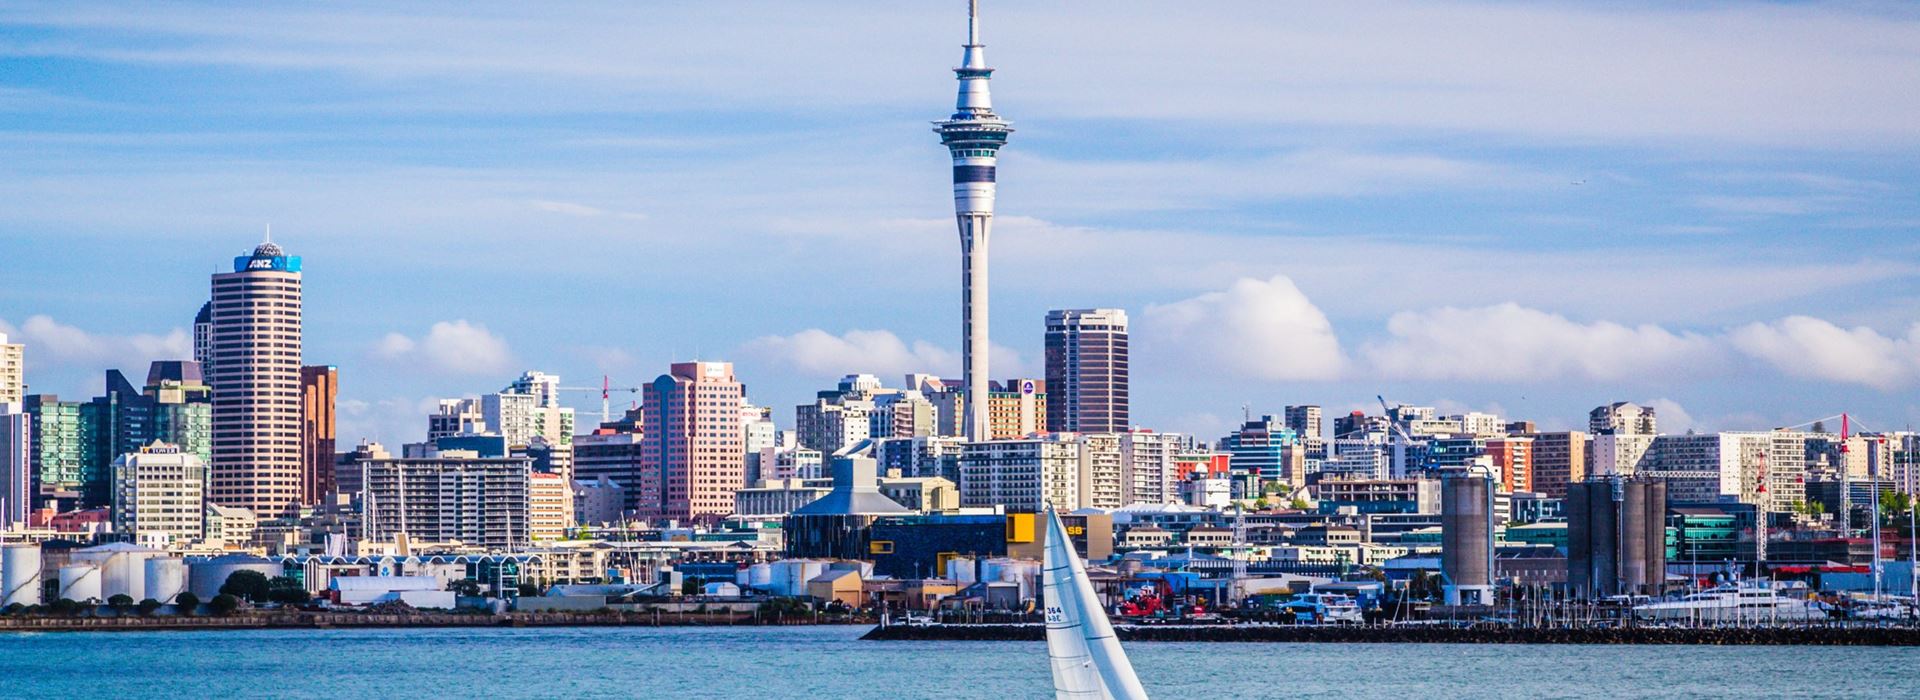 7 amazing towns and cities to visit in New Zealand